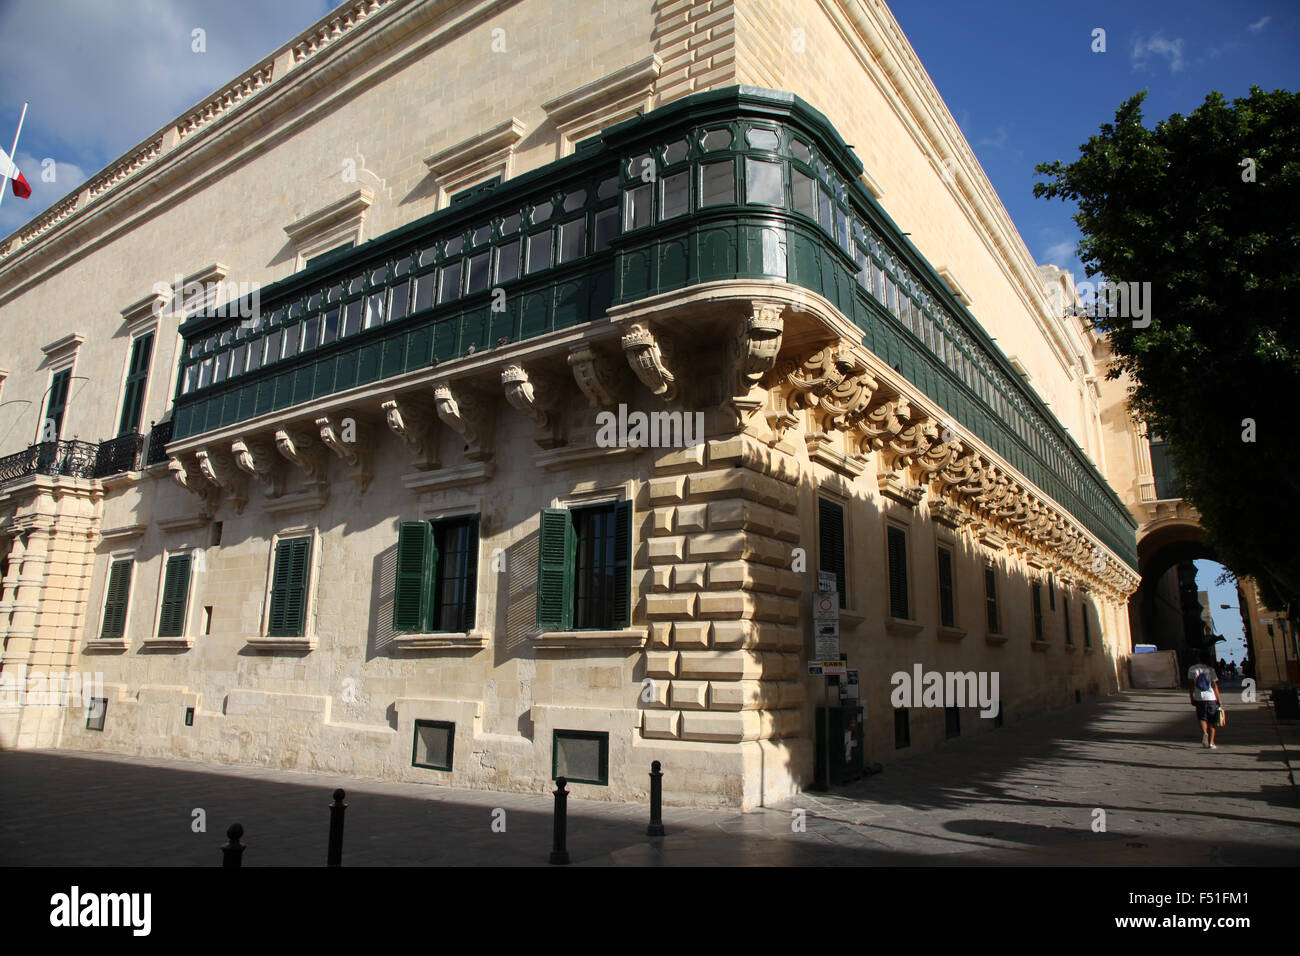 One corner of the Palace features a wrap-around balcony in the architecture Stock Photo